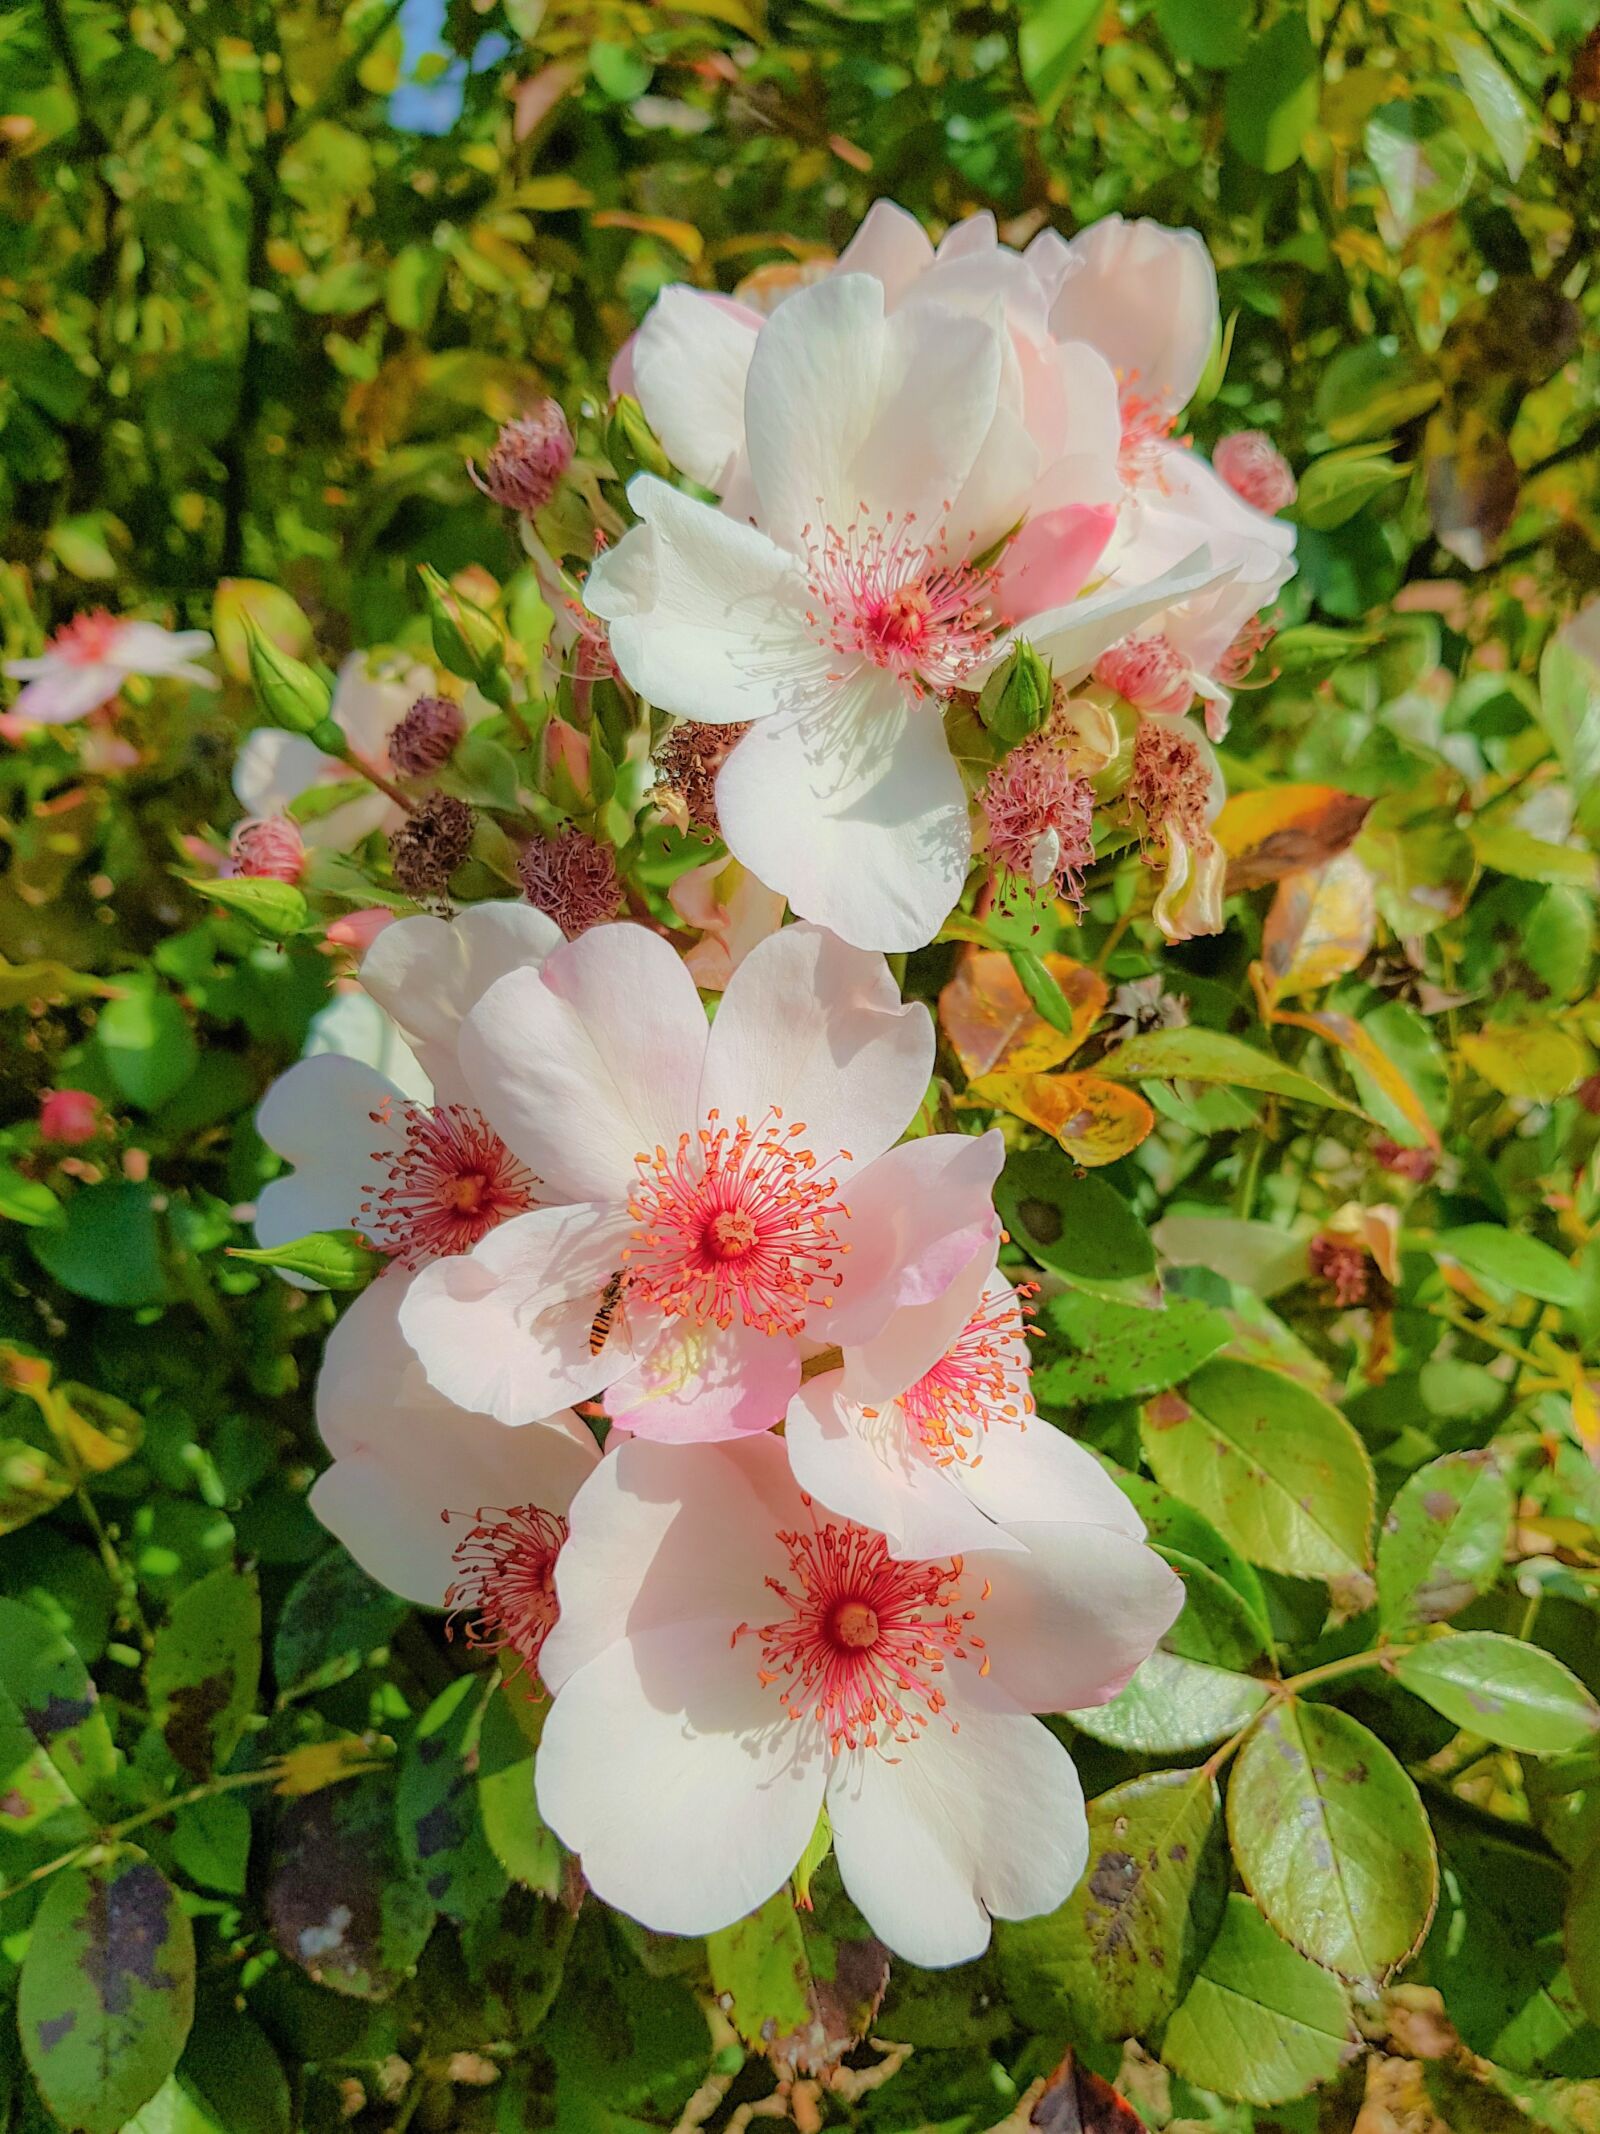 Samsung Galaxy S8+ Rear Camera sample photo. Flowers, white flowers, nature photography